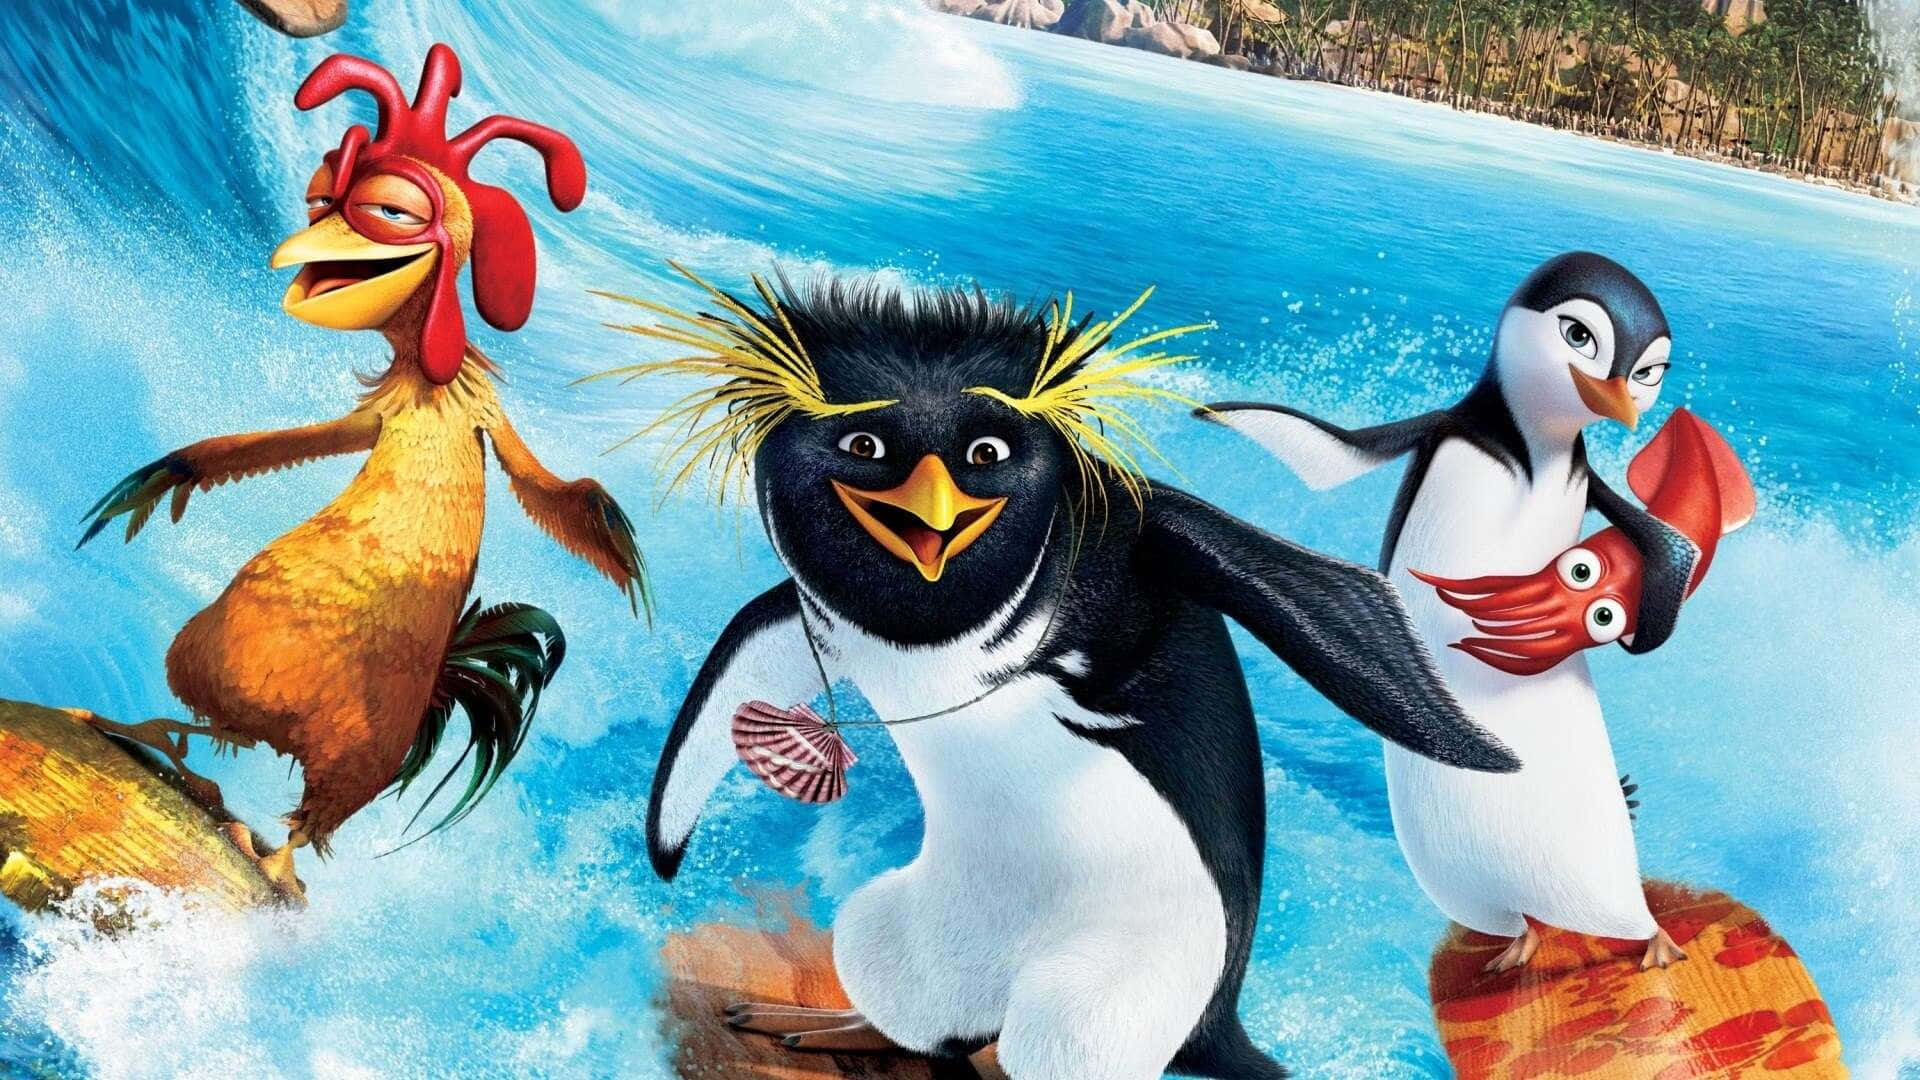 Animated Surfing Characters Chicken Joeand Friends Wallpaper